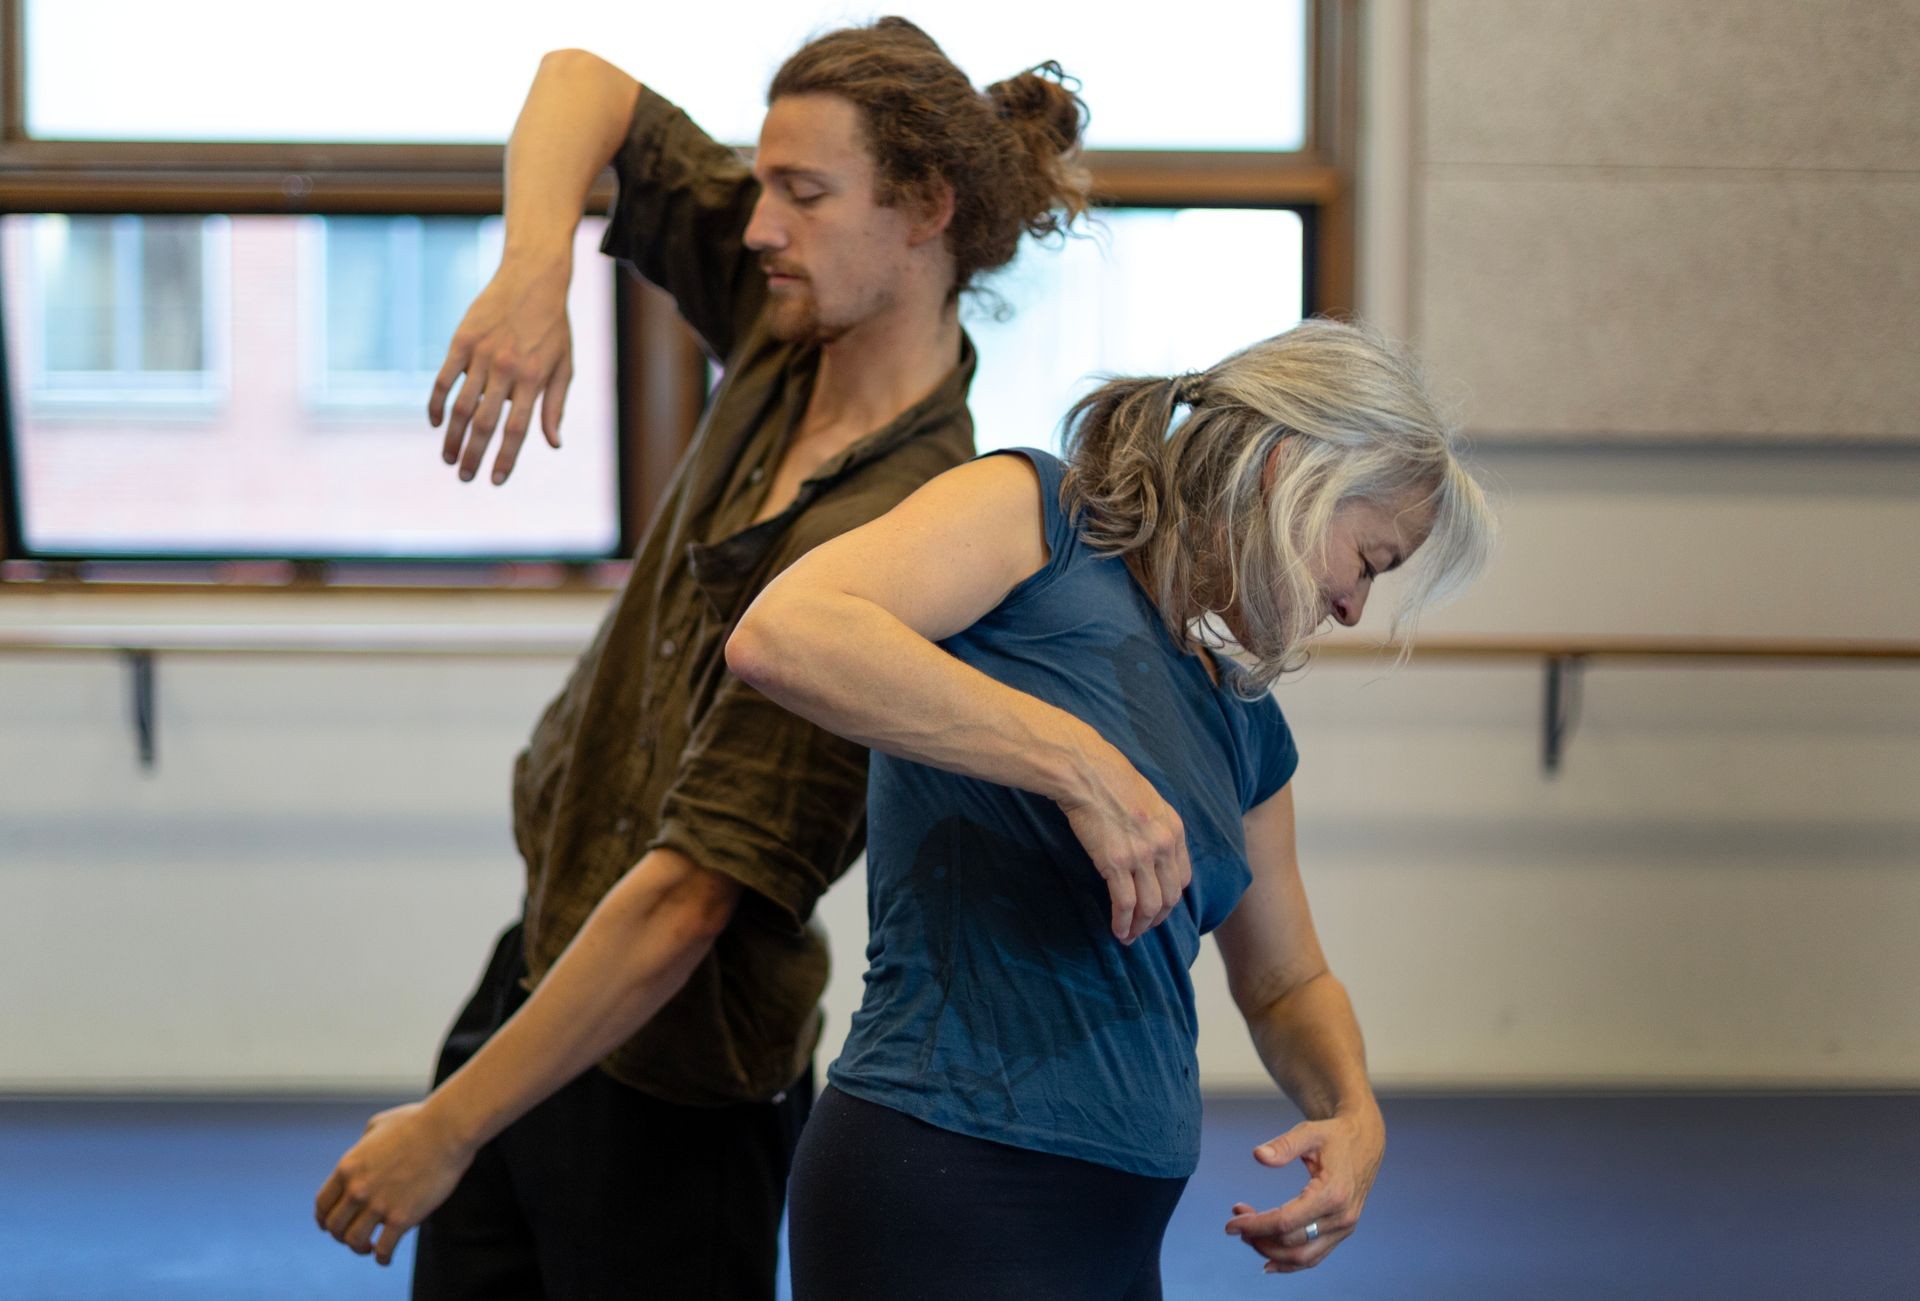 Community dance and movement Workshops of The Explore Practice